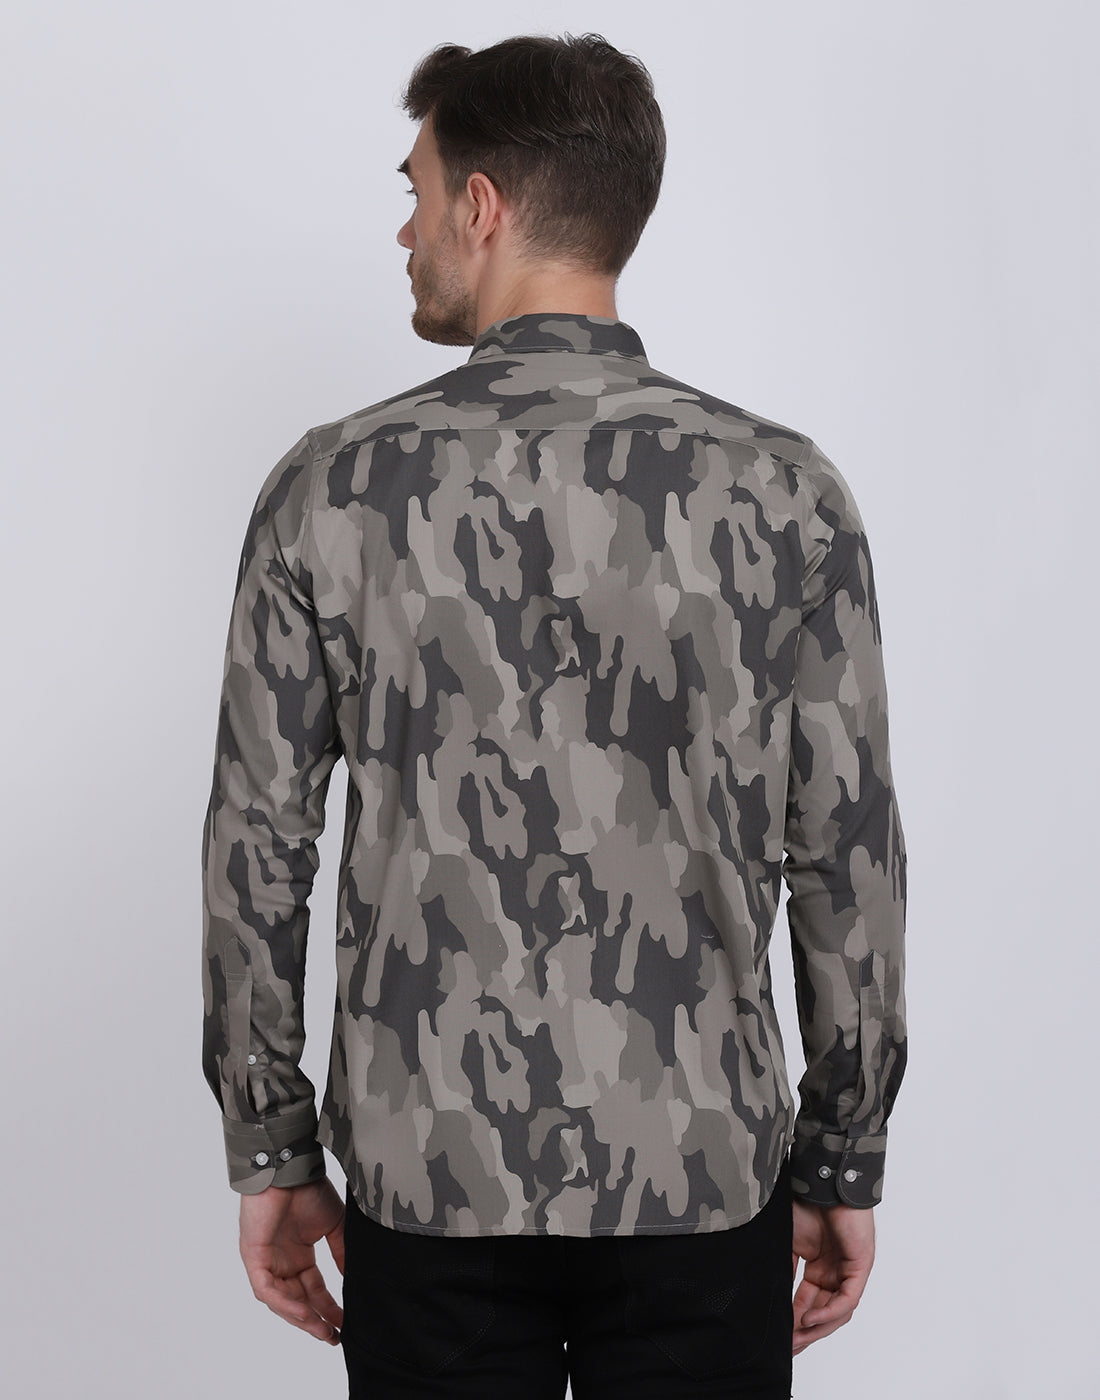 camouflage army Print shirt